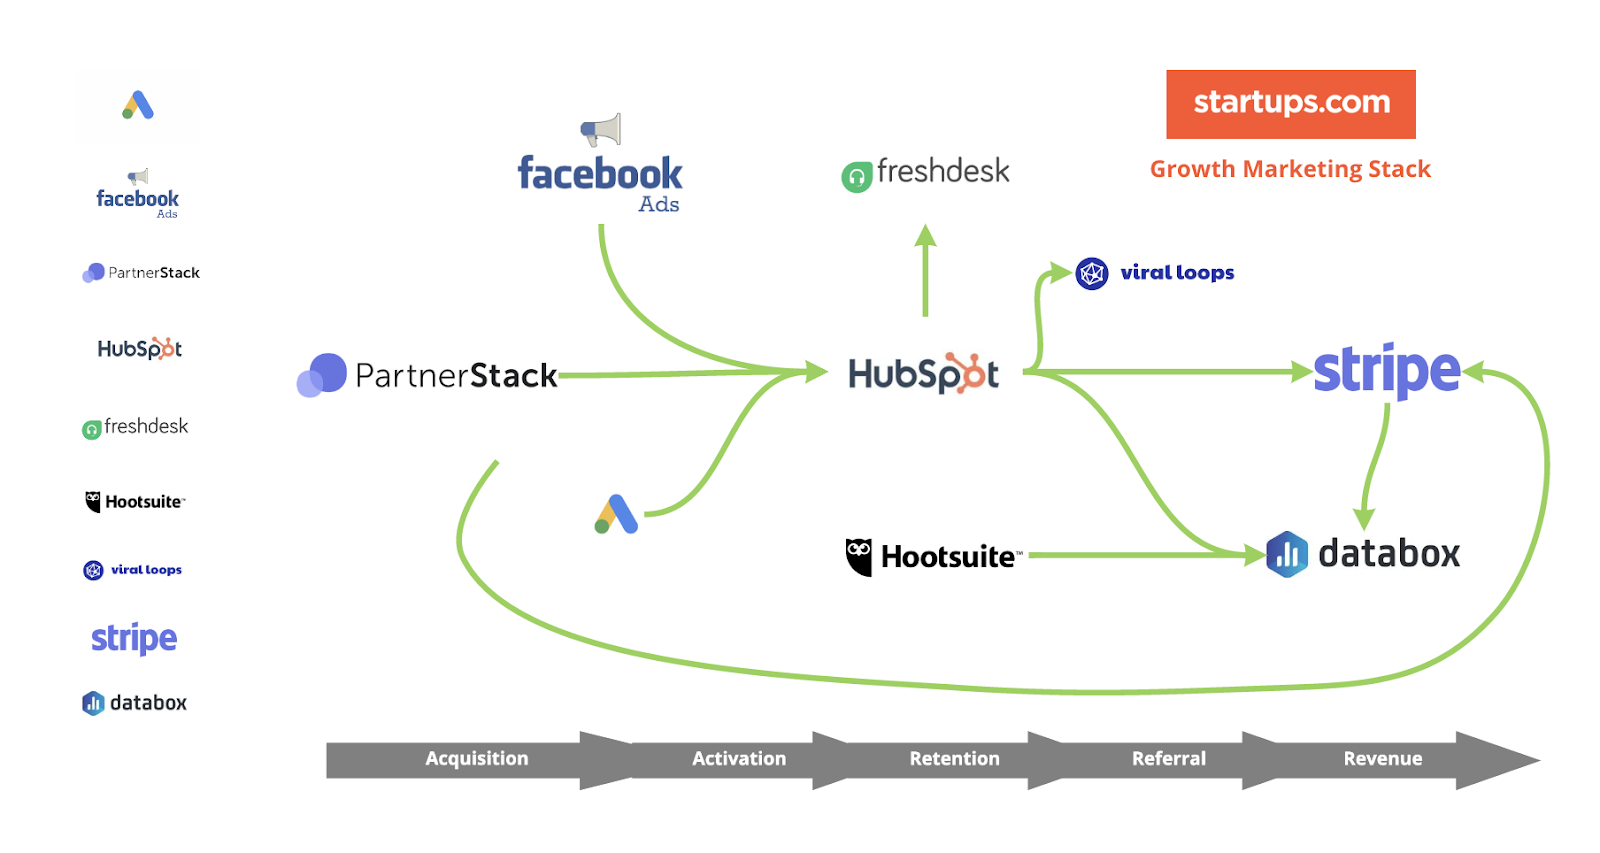 A Growth Marketing Stack for Startups